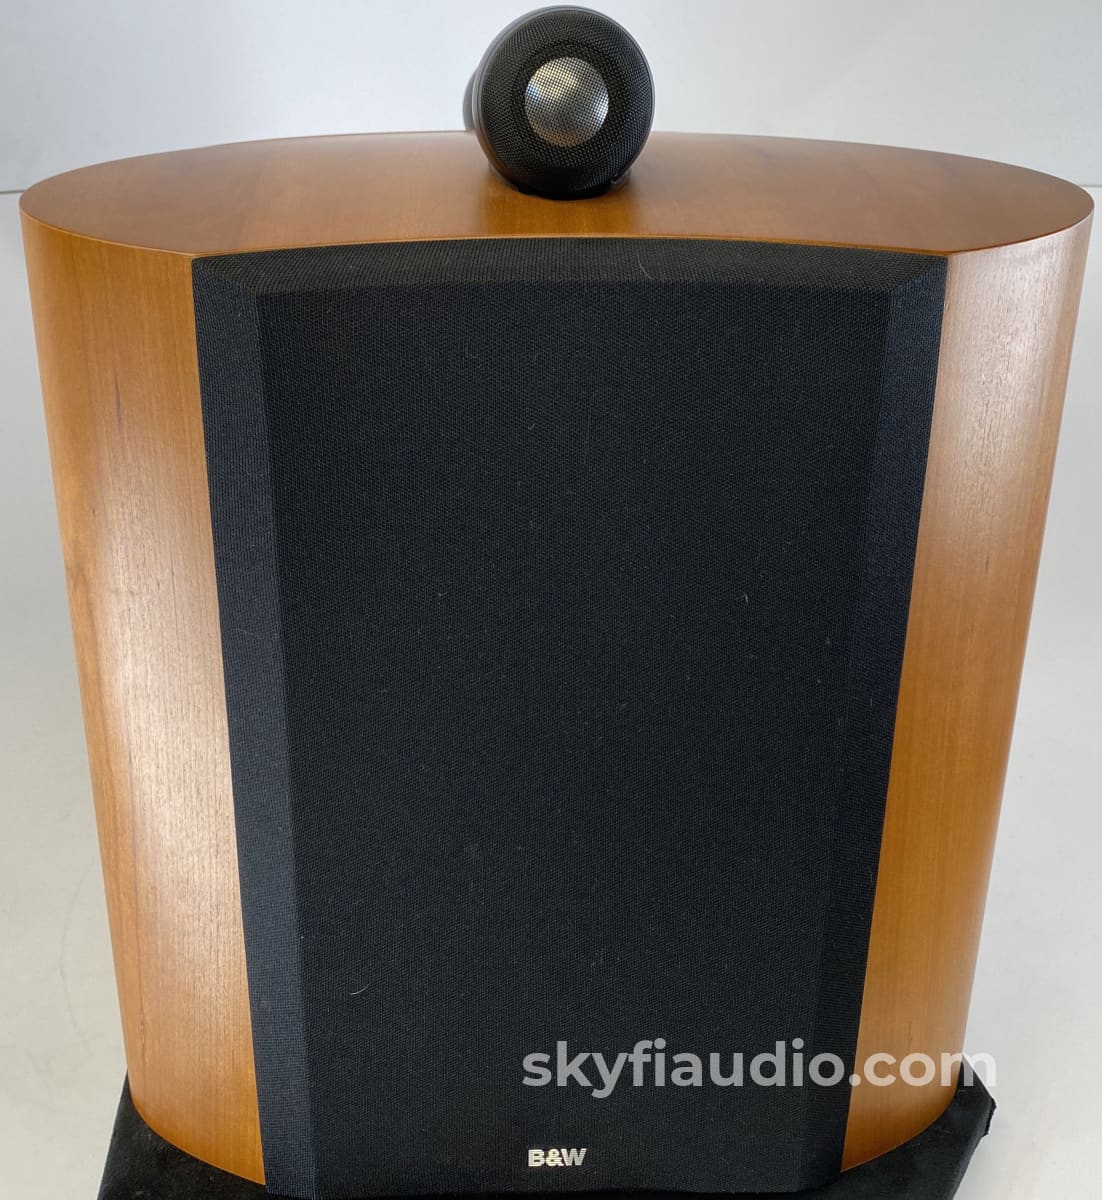 B&W (Bowers & Wilkins) Nautilus SCM1 Home Theater Speakers in Cherry